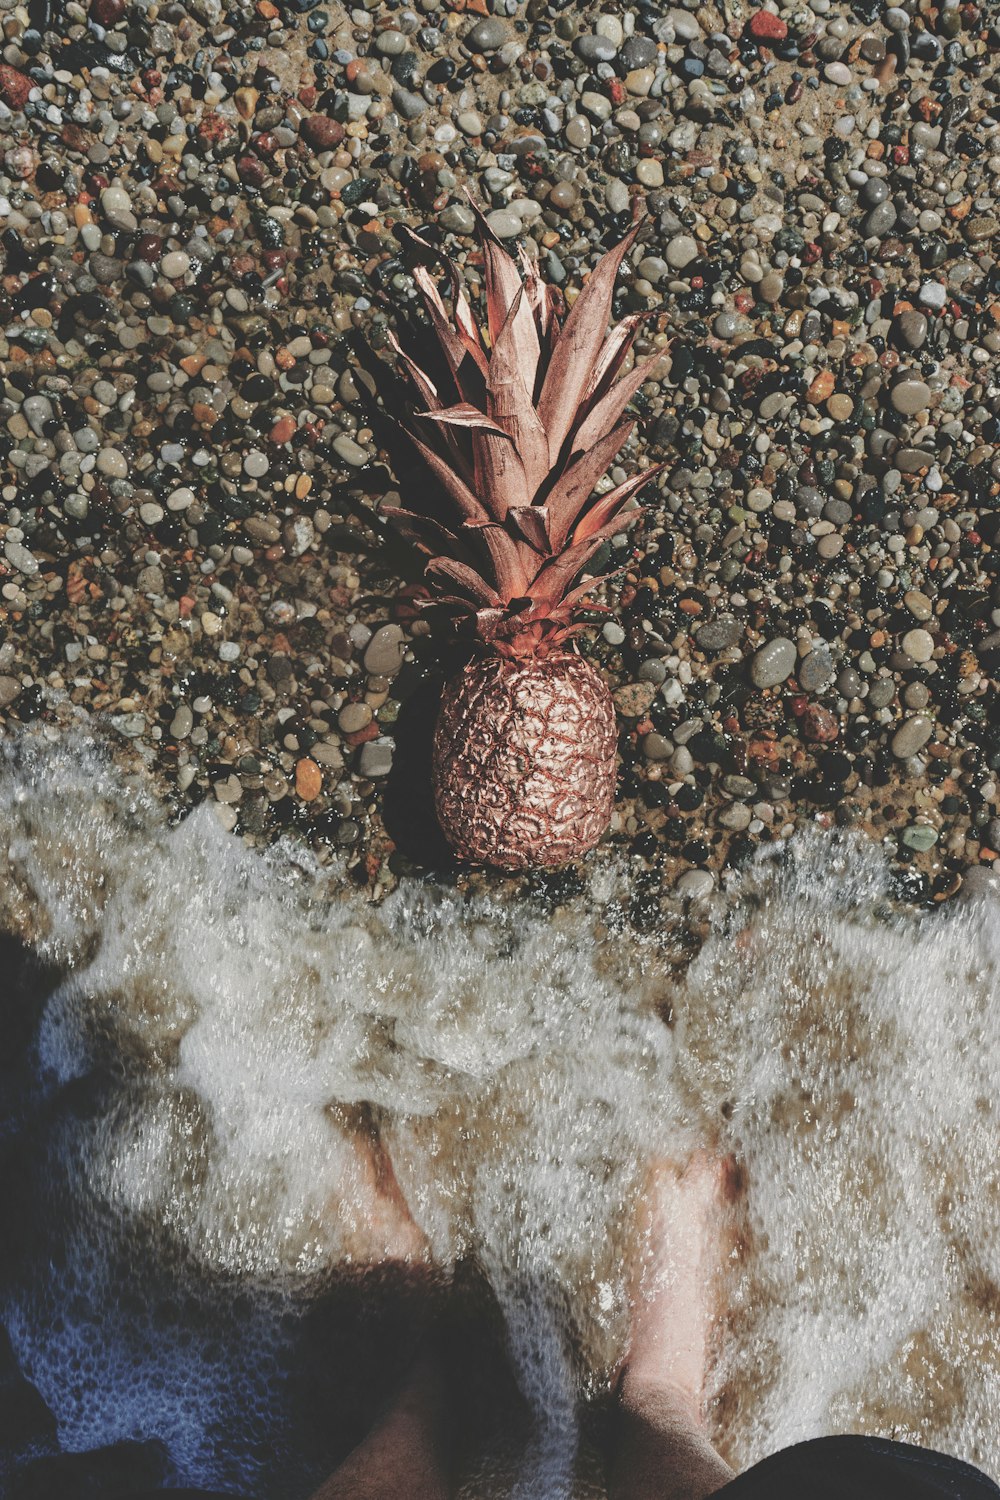 pink pineapple on grey gravel near body of water